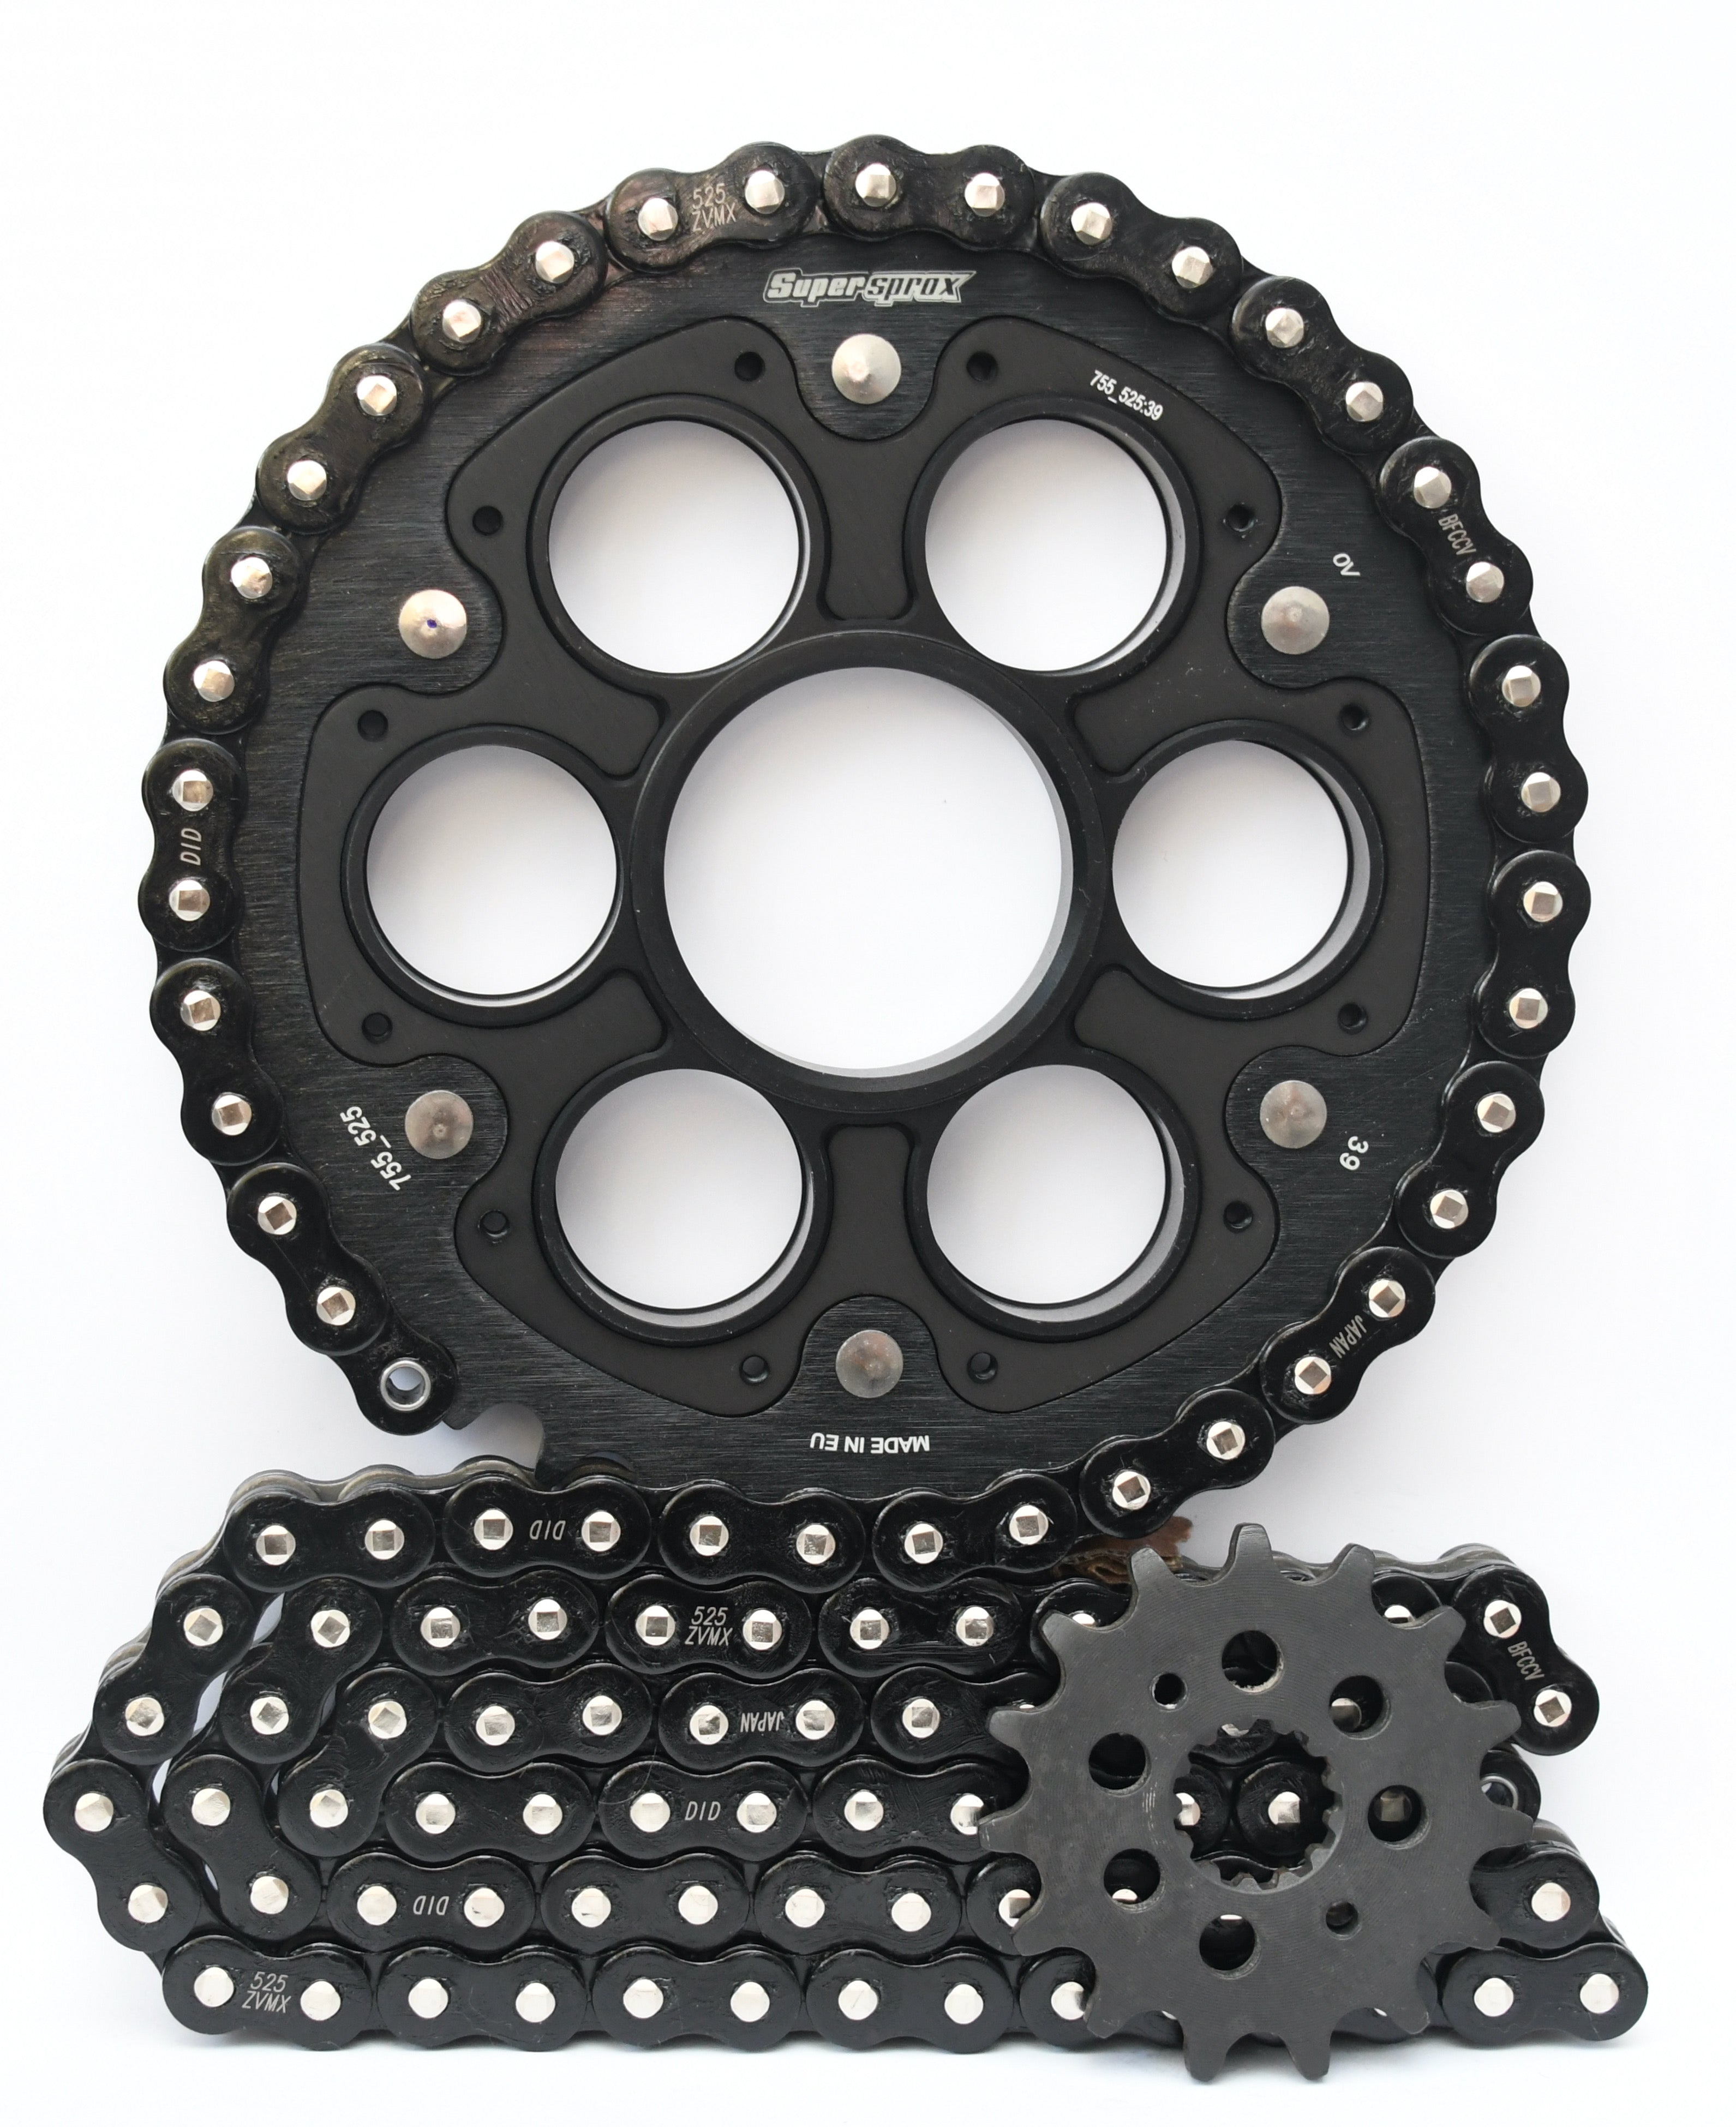 Supersprox Chain & Sprocket Kit for Ducati Panigale V2 - Choose Your Gearing